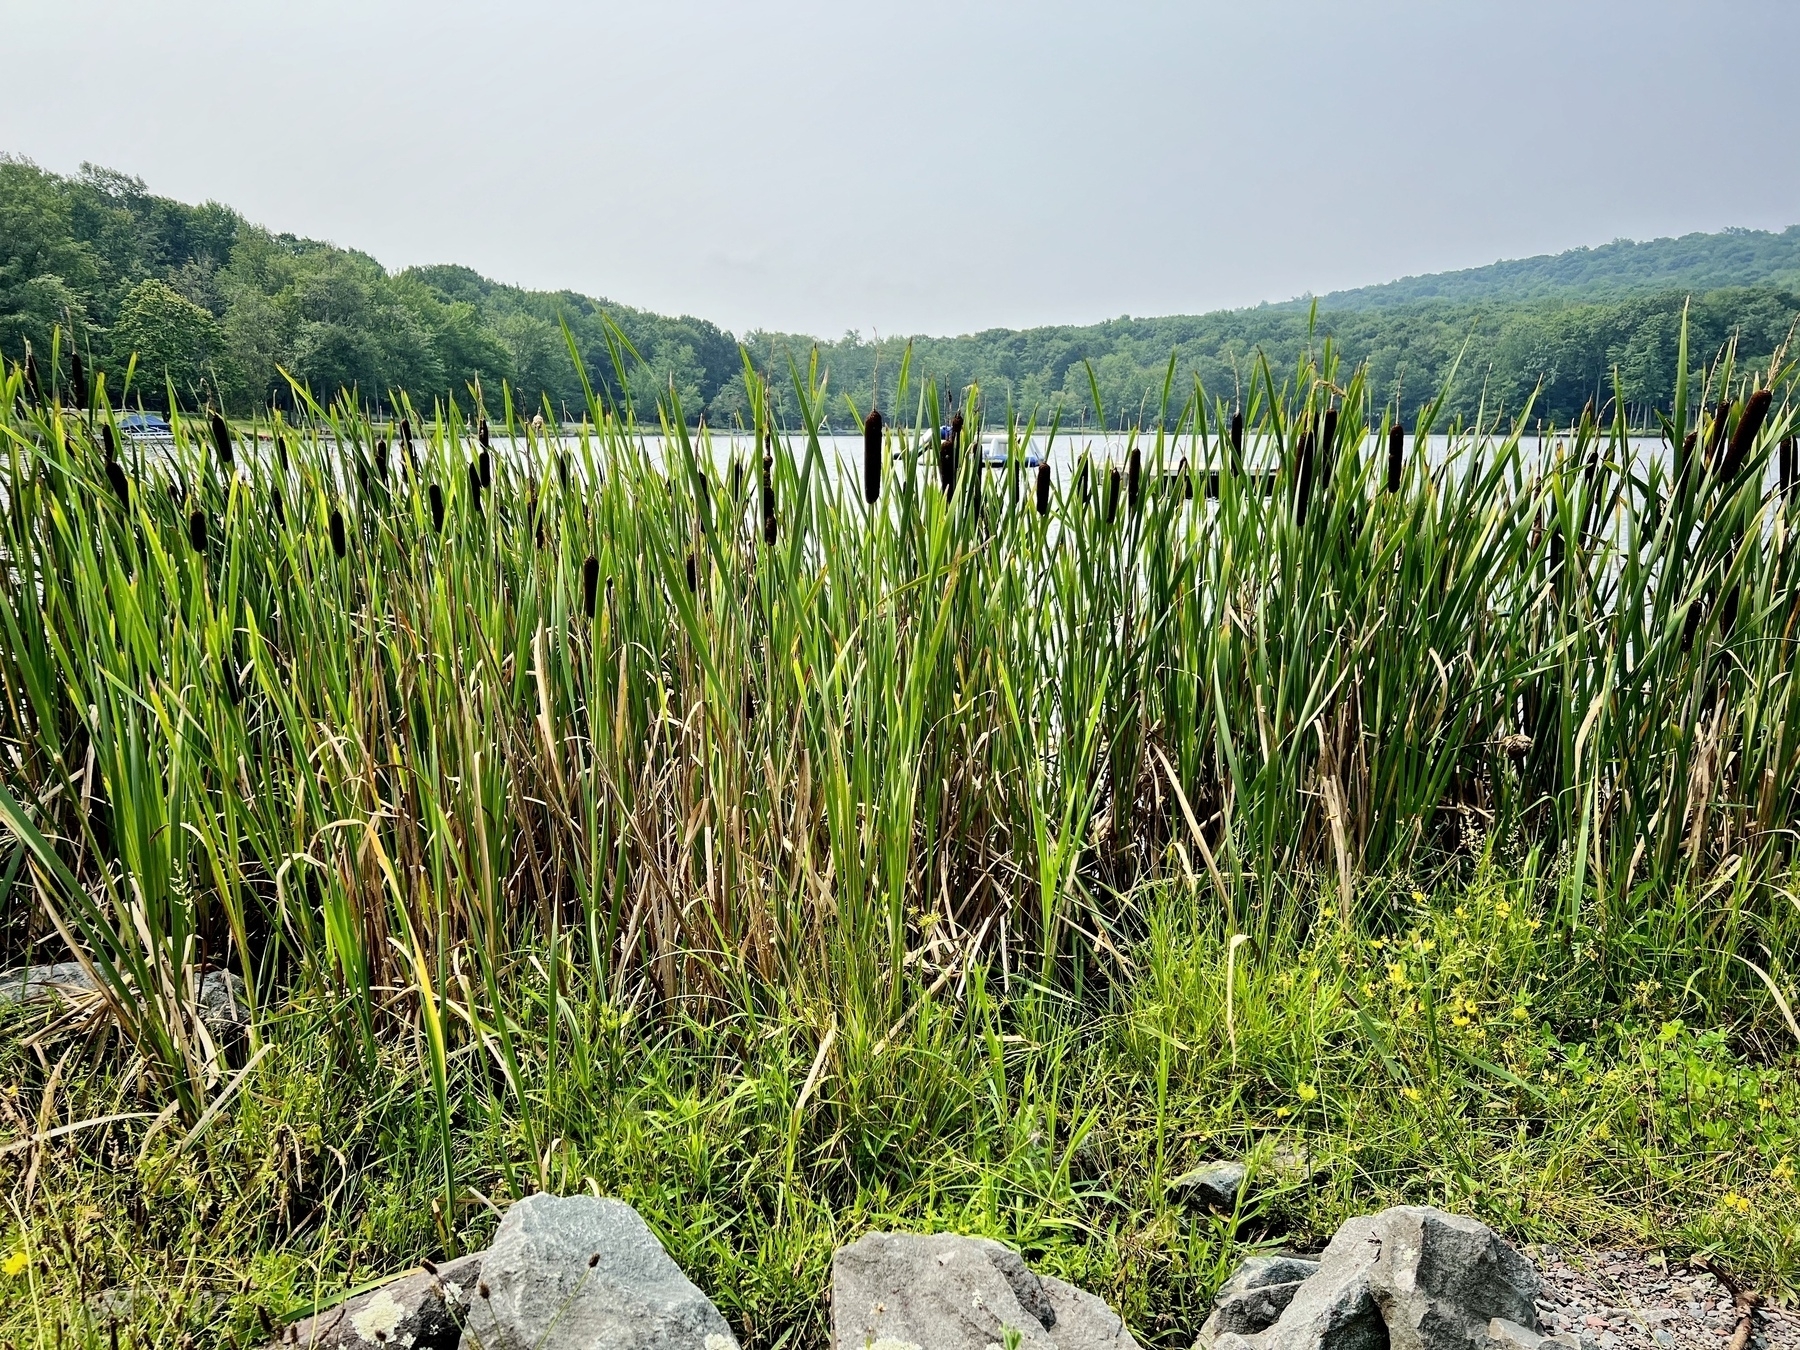 Cattail plants by a lake